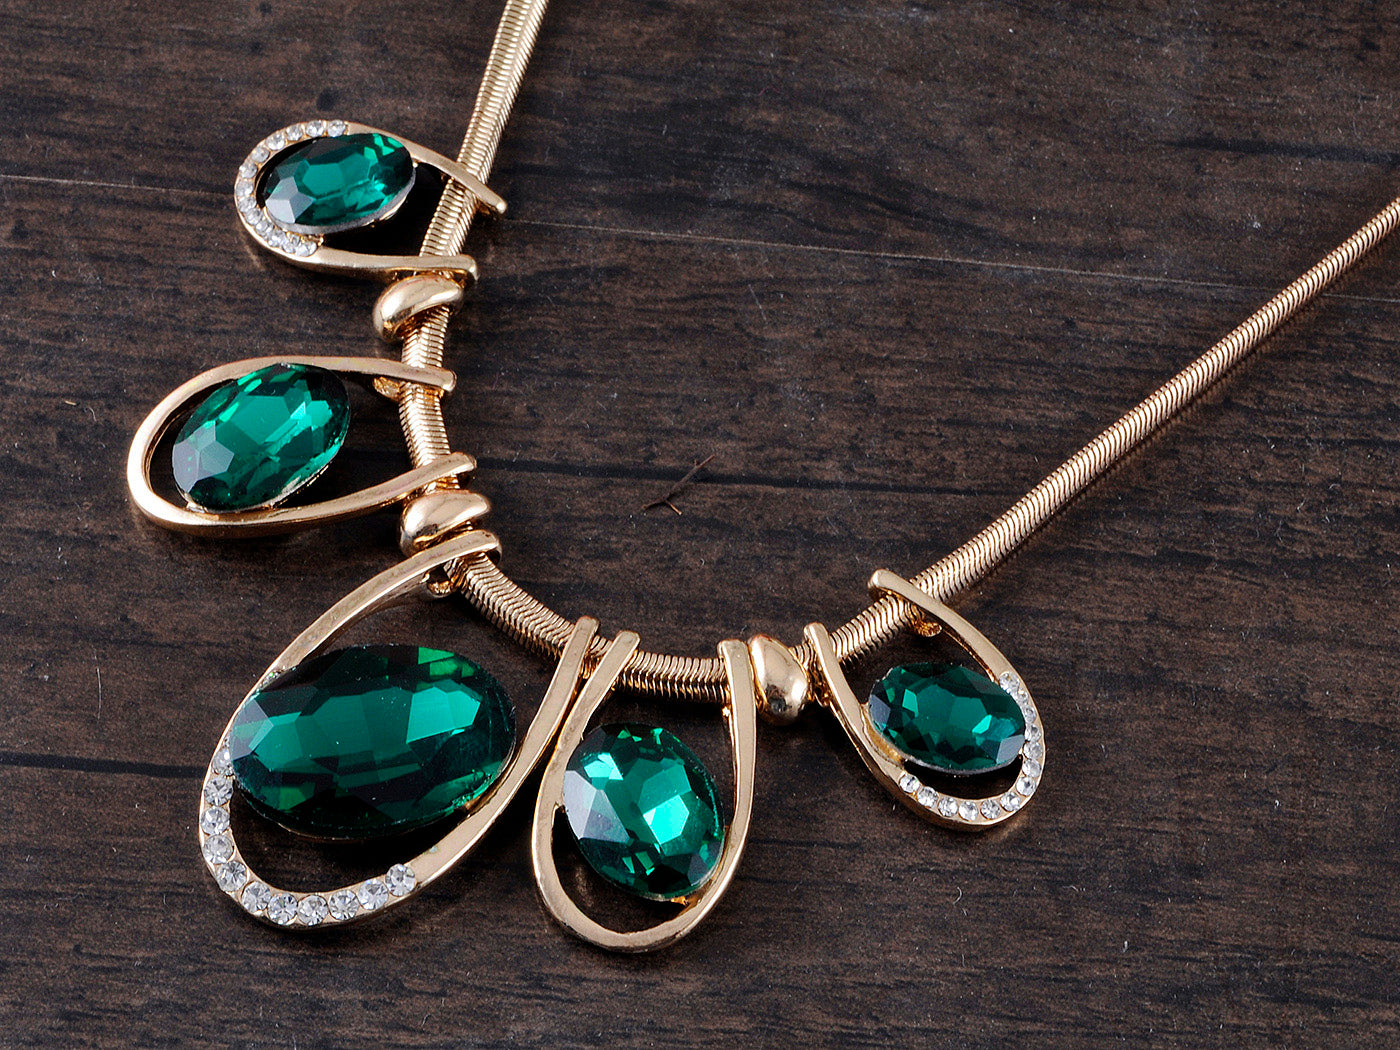 Oval Emerald Gemss Classic Necklace